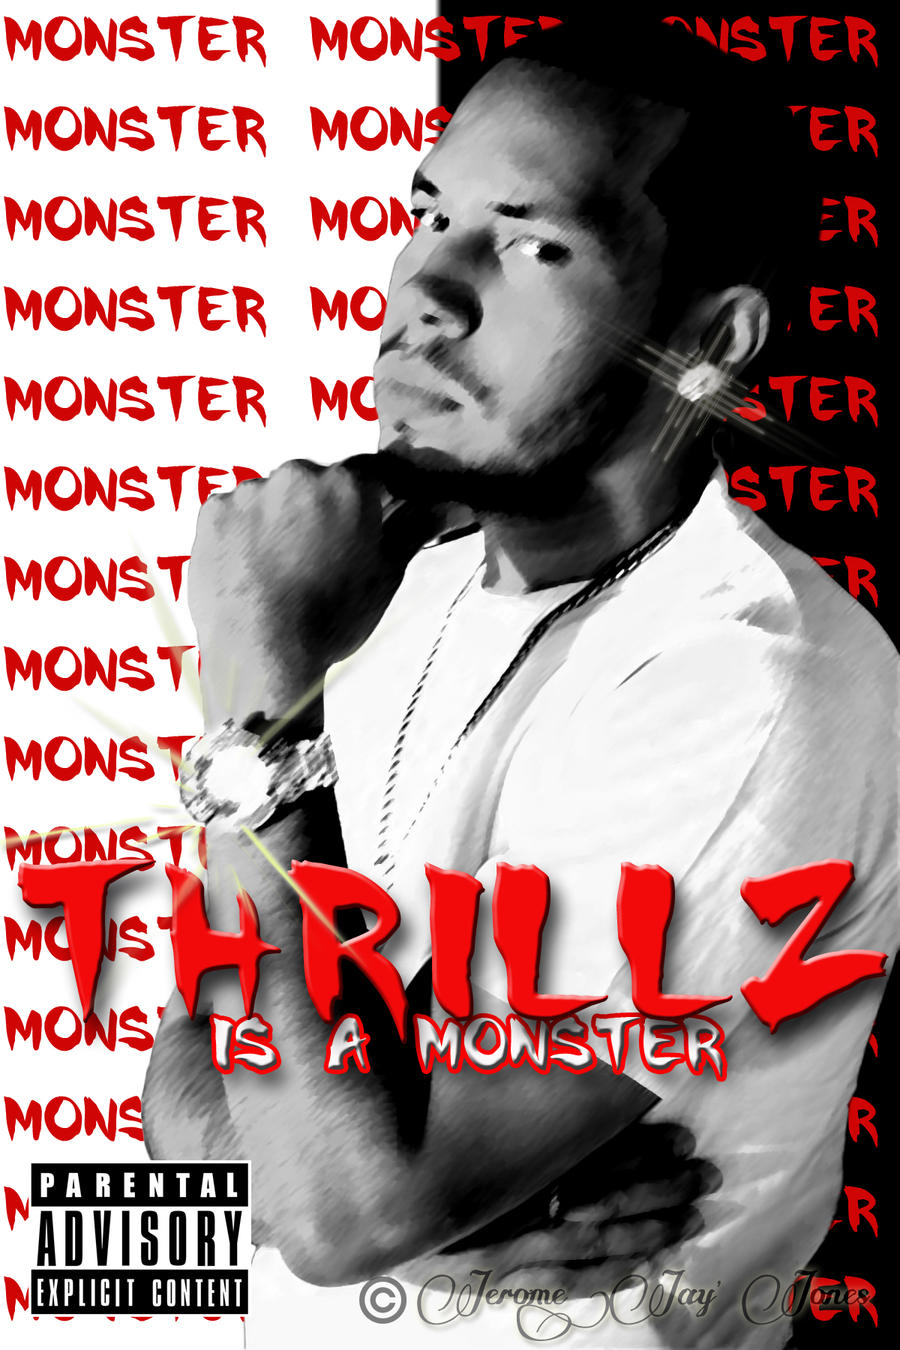  - thrillz_the_monster_by_jay_hood-d3kyswa